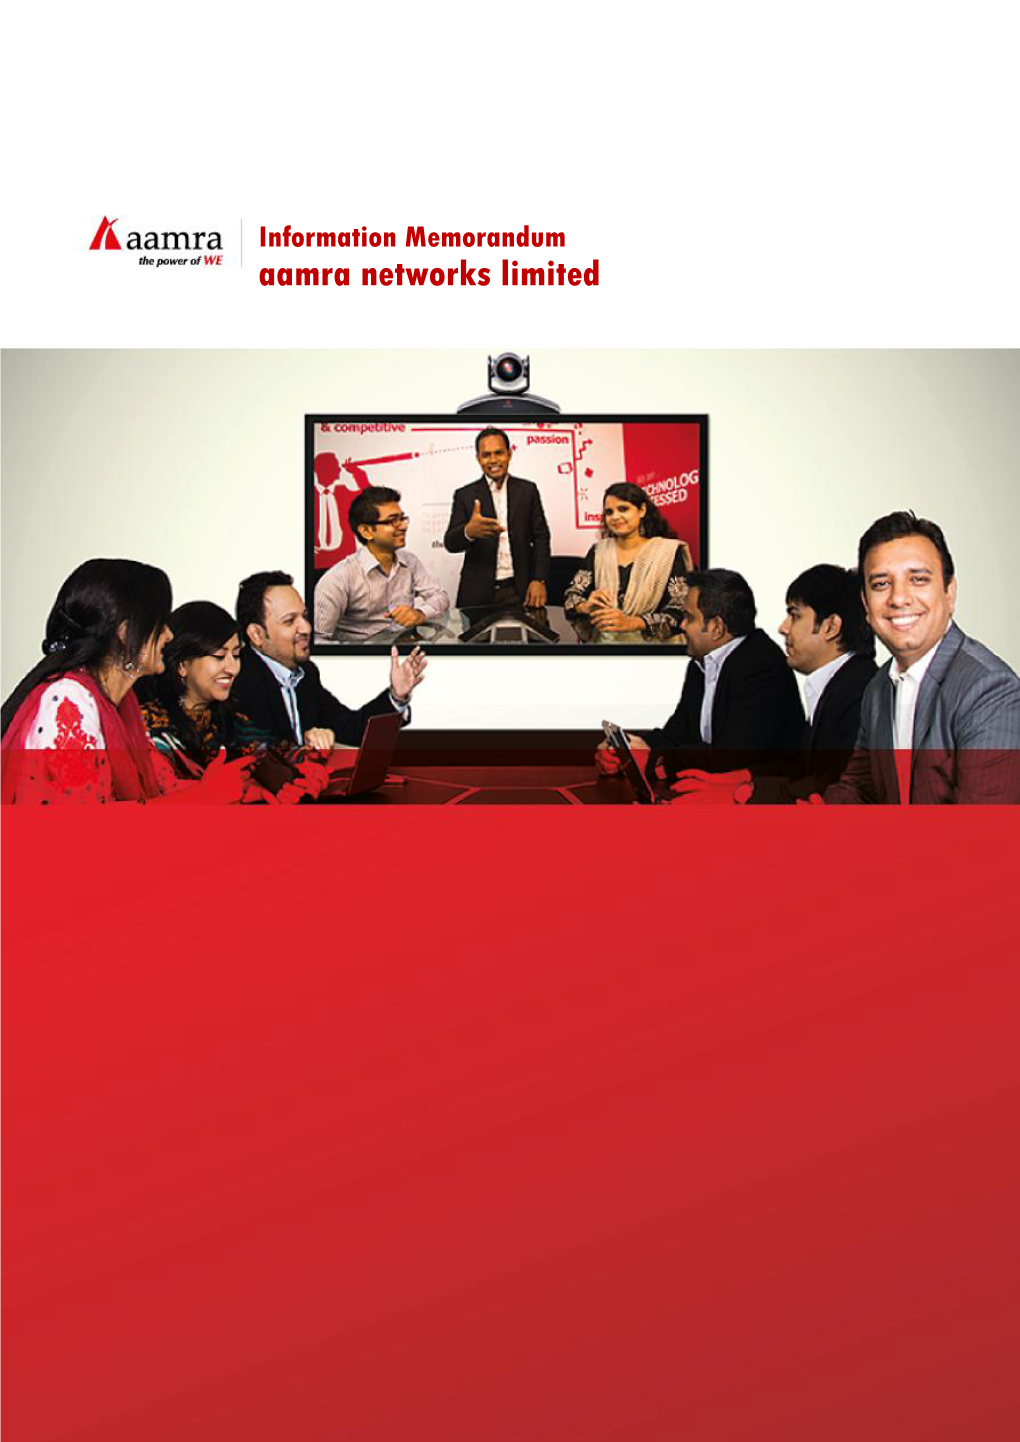 Aamra Networks Limited